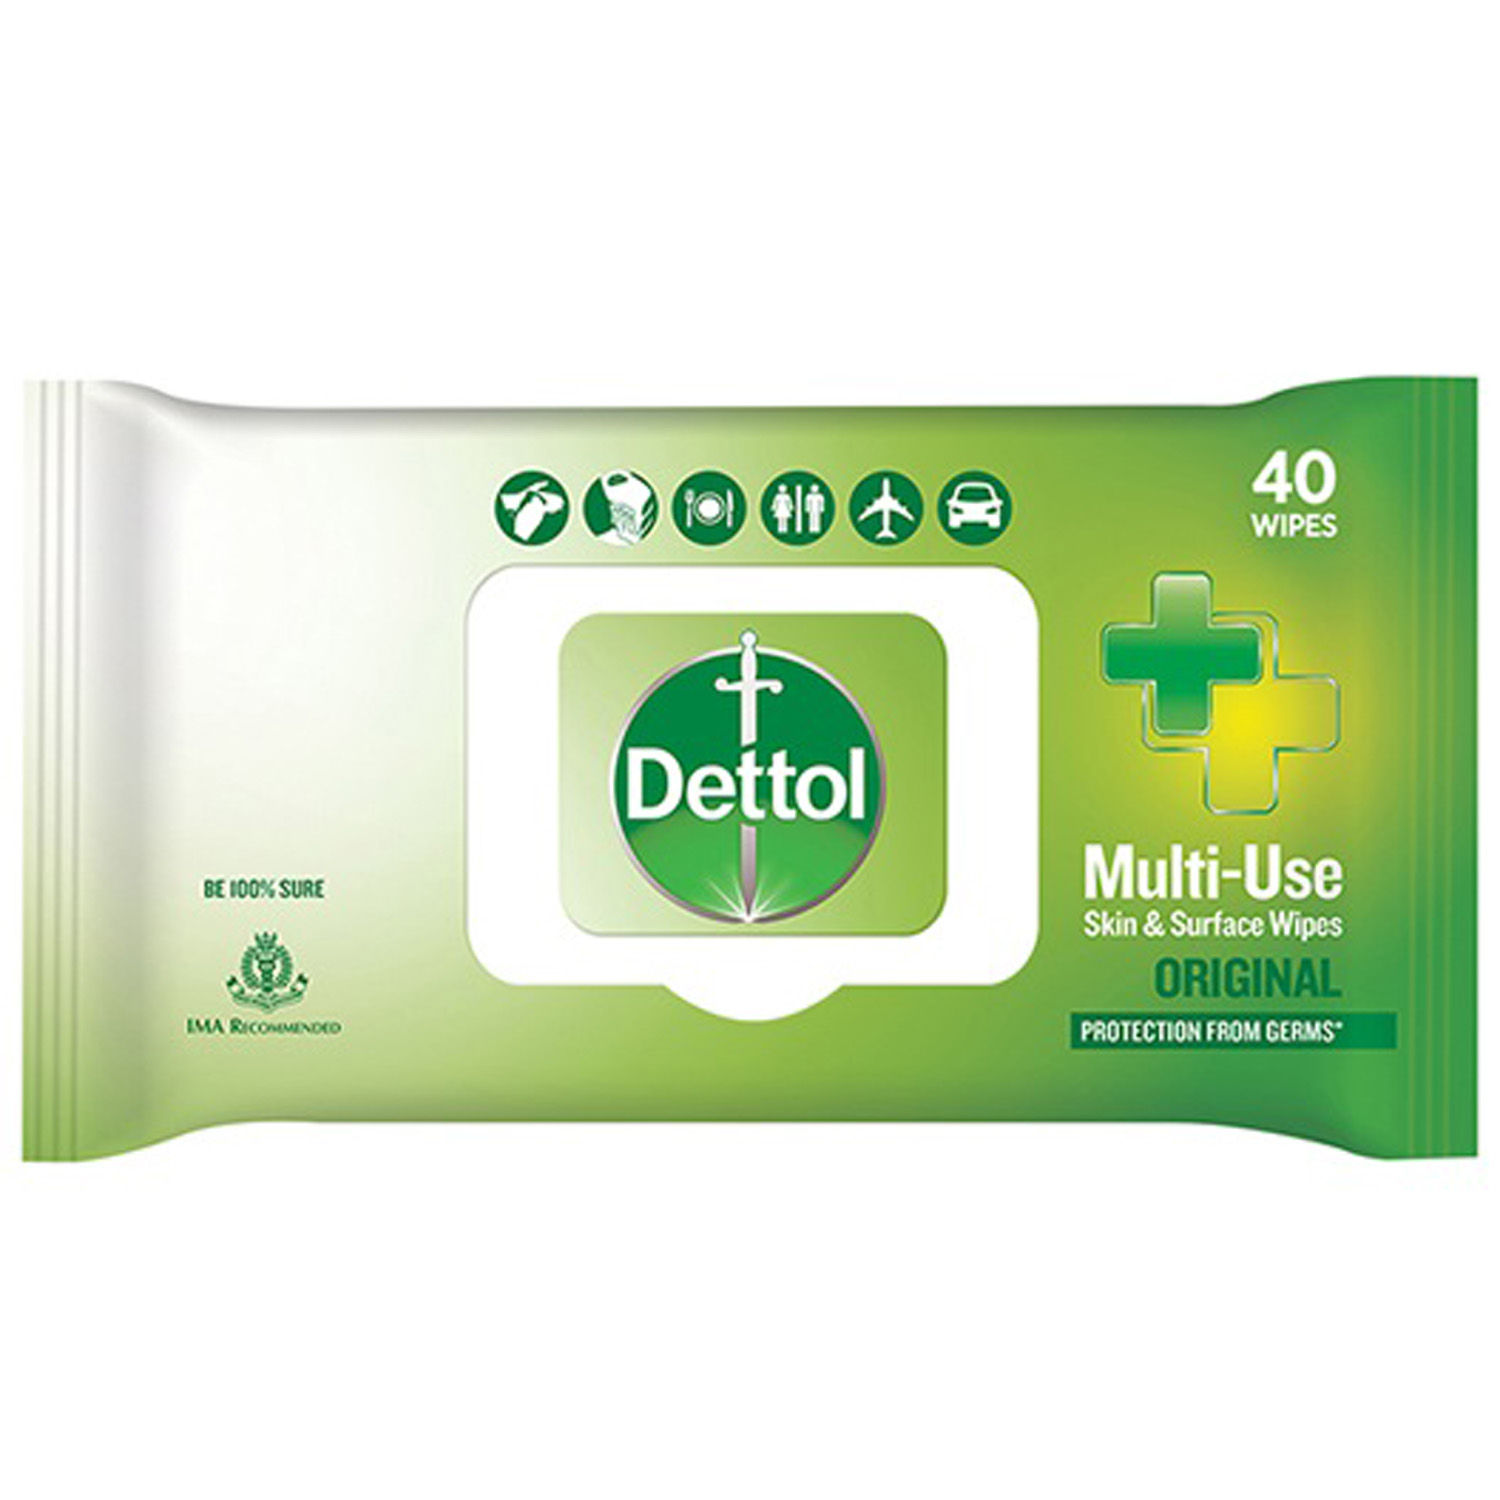 Buy Dettol Original Multi-Use Skin & Surface Wipes, 40 Count Online